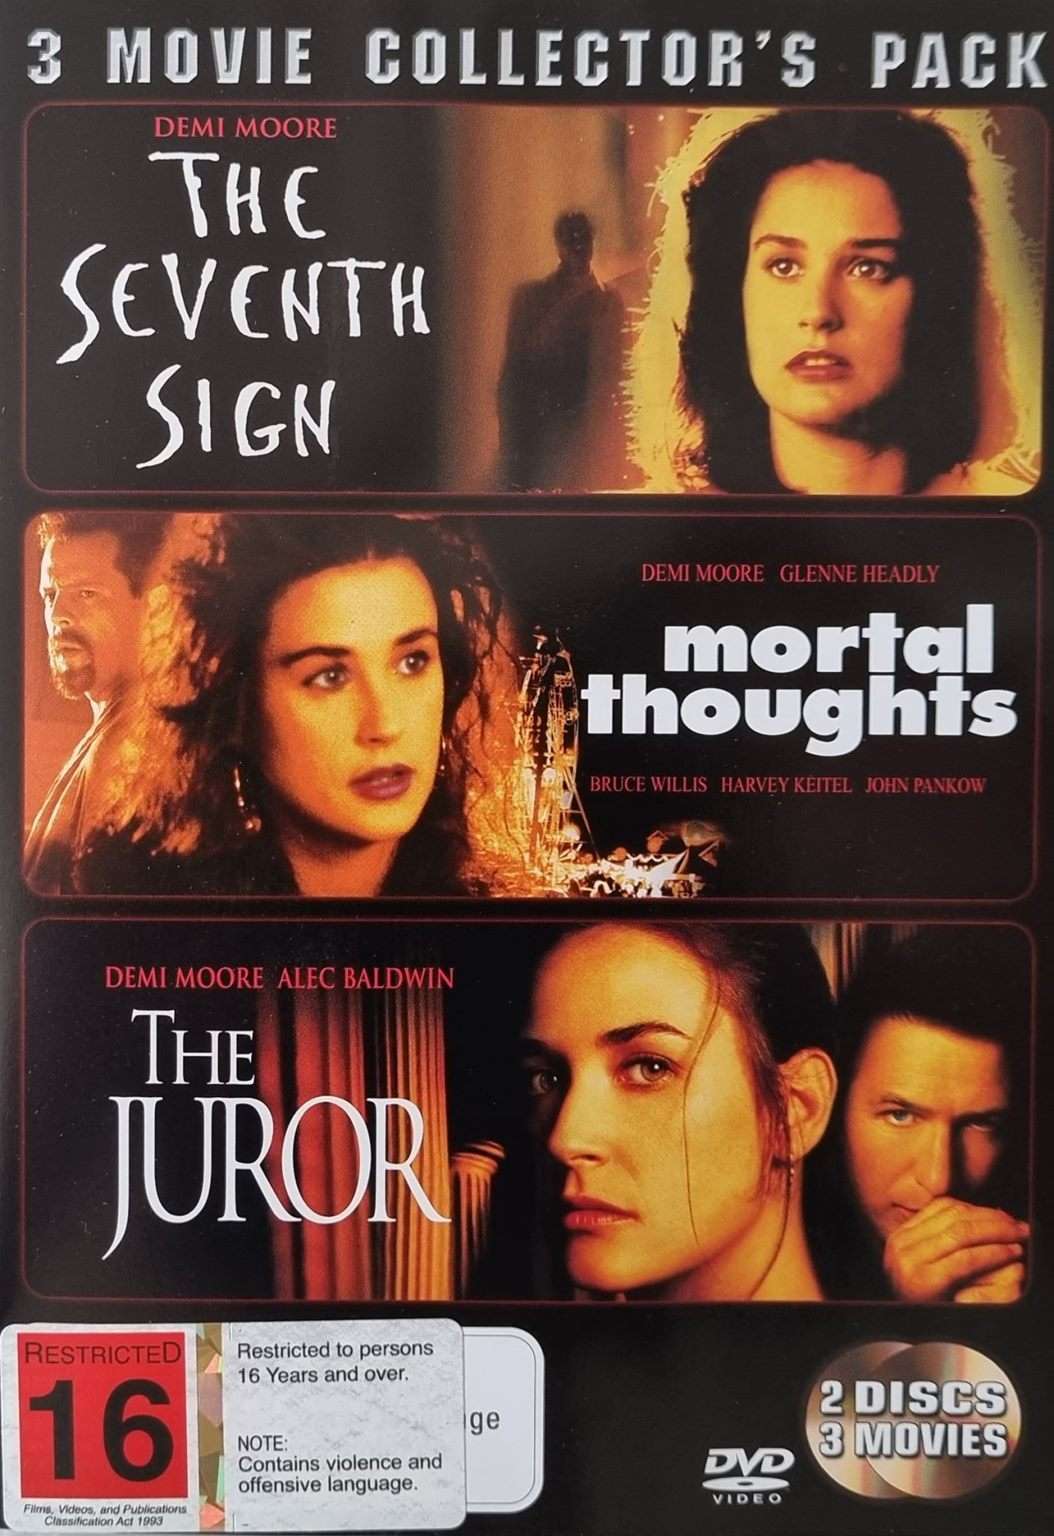 The Seventh Sign / Mortal Thoughts / The Juror